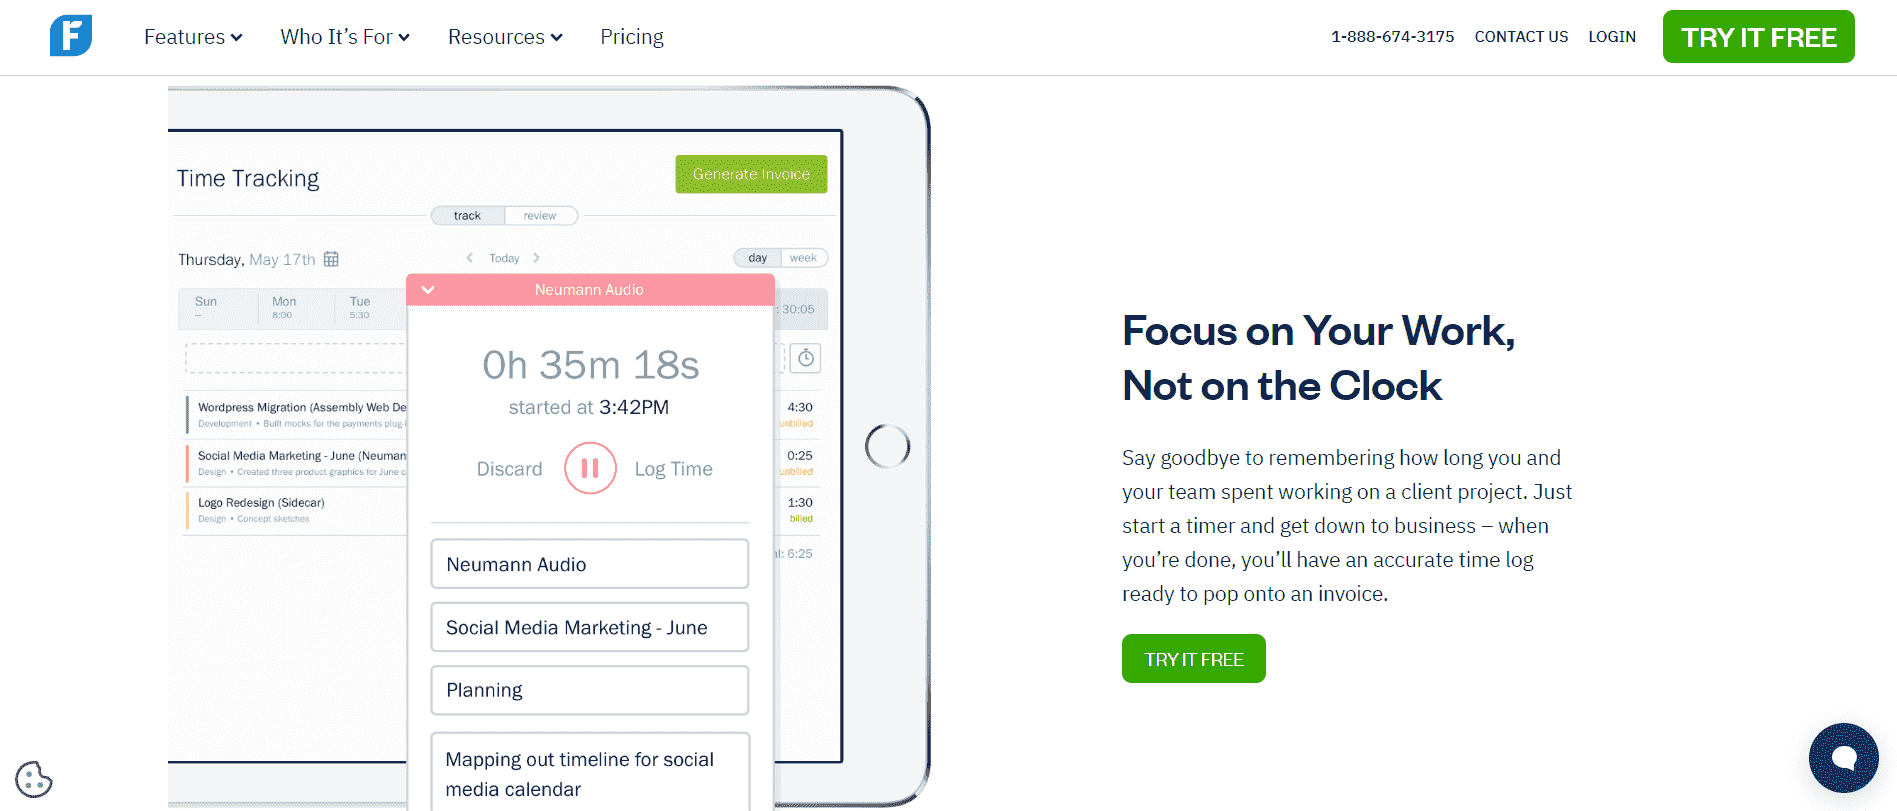 Homepage of 'freshbooks' time tracker section, showing time tracking data and mentioning 'focus on your work, not the clock".